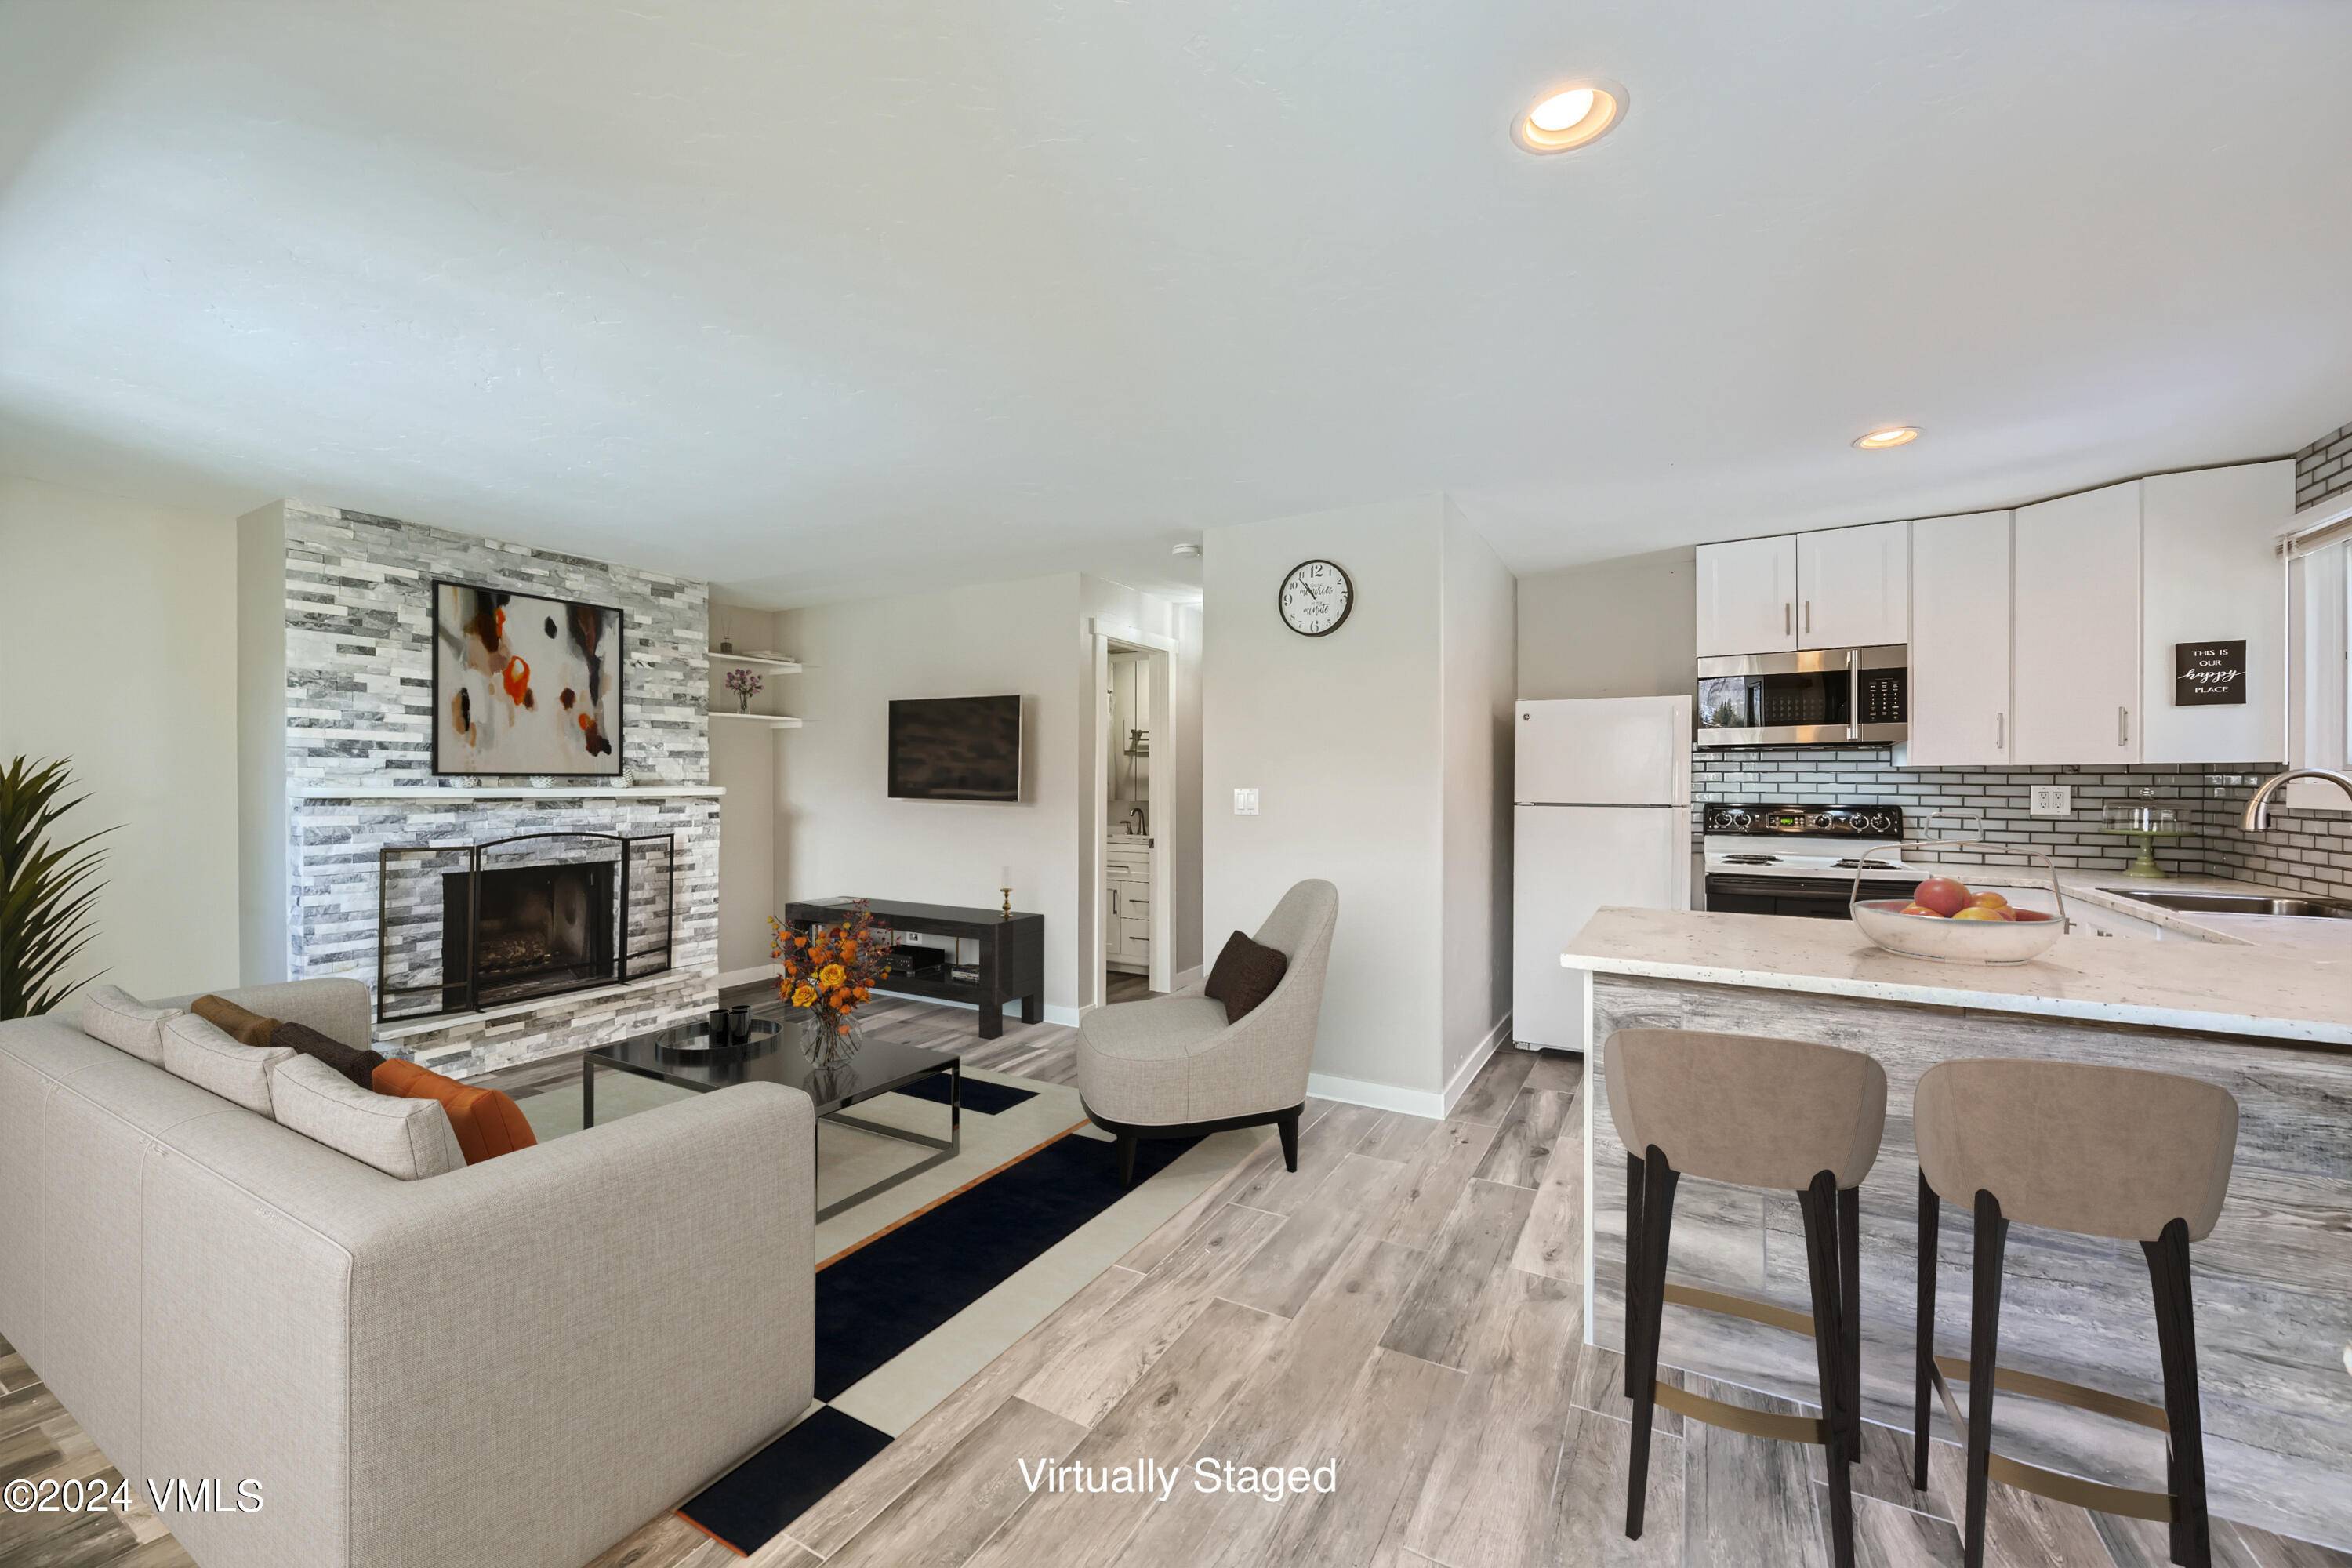 Embrace the mountain lifestyle you deserve in this beautifully remodeled 2 bedroom, 1 bath end unit condo.